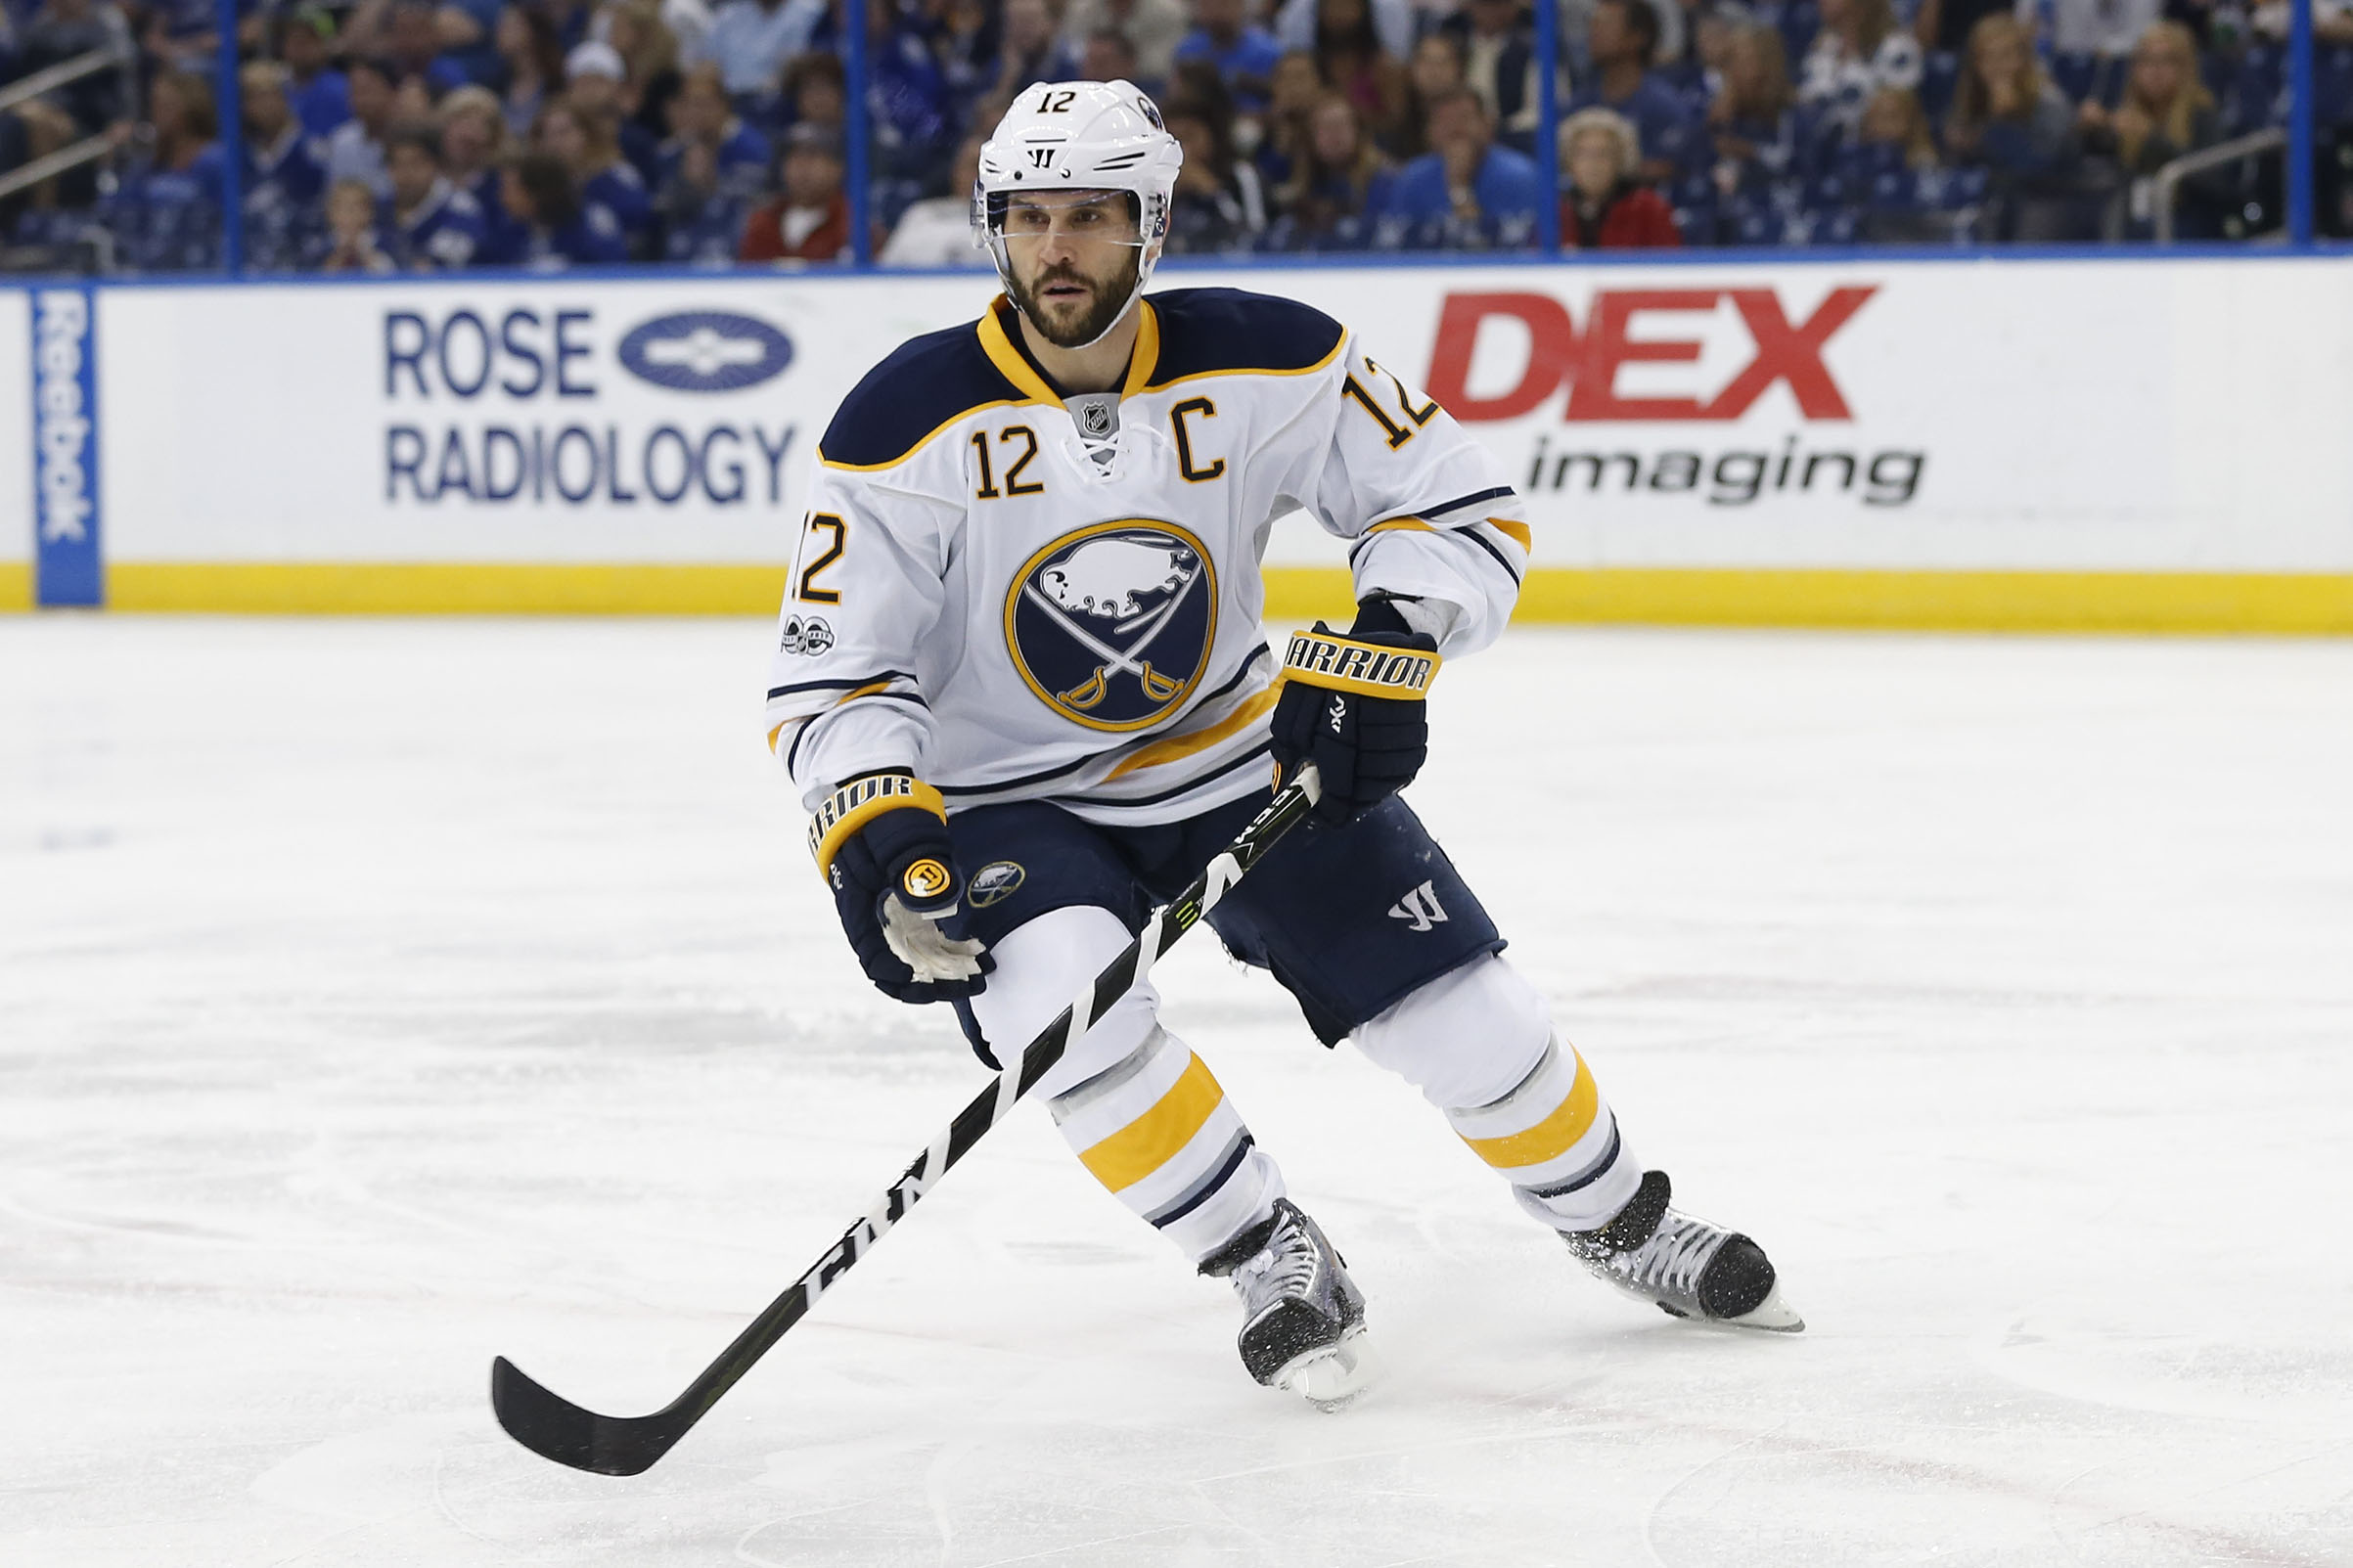 Buffalo Sabres right wing Brian Gionta skates in the 1st period of the NHL game between the Buffalo Sabres and Tampa Bay Lightning on April 09, 2017. (Mark LoMoglio—Icon Sportswire/Getty Images)